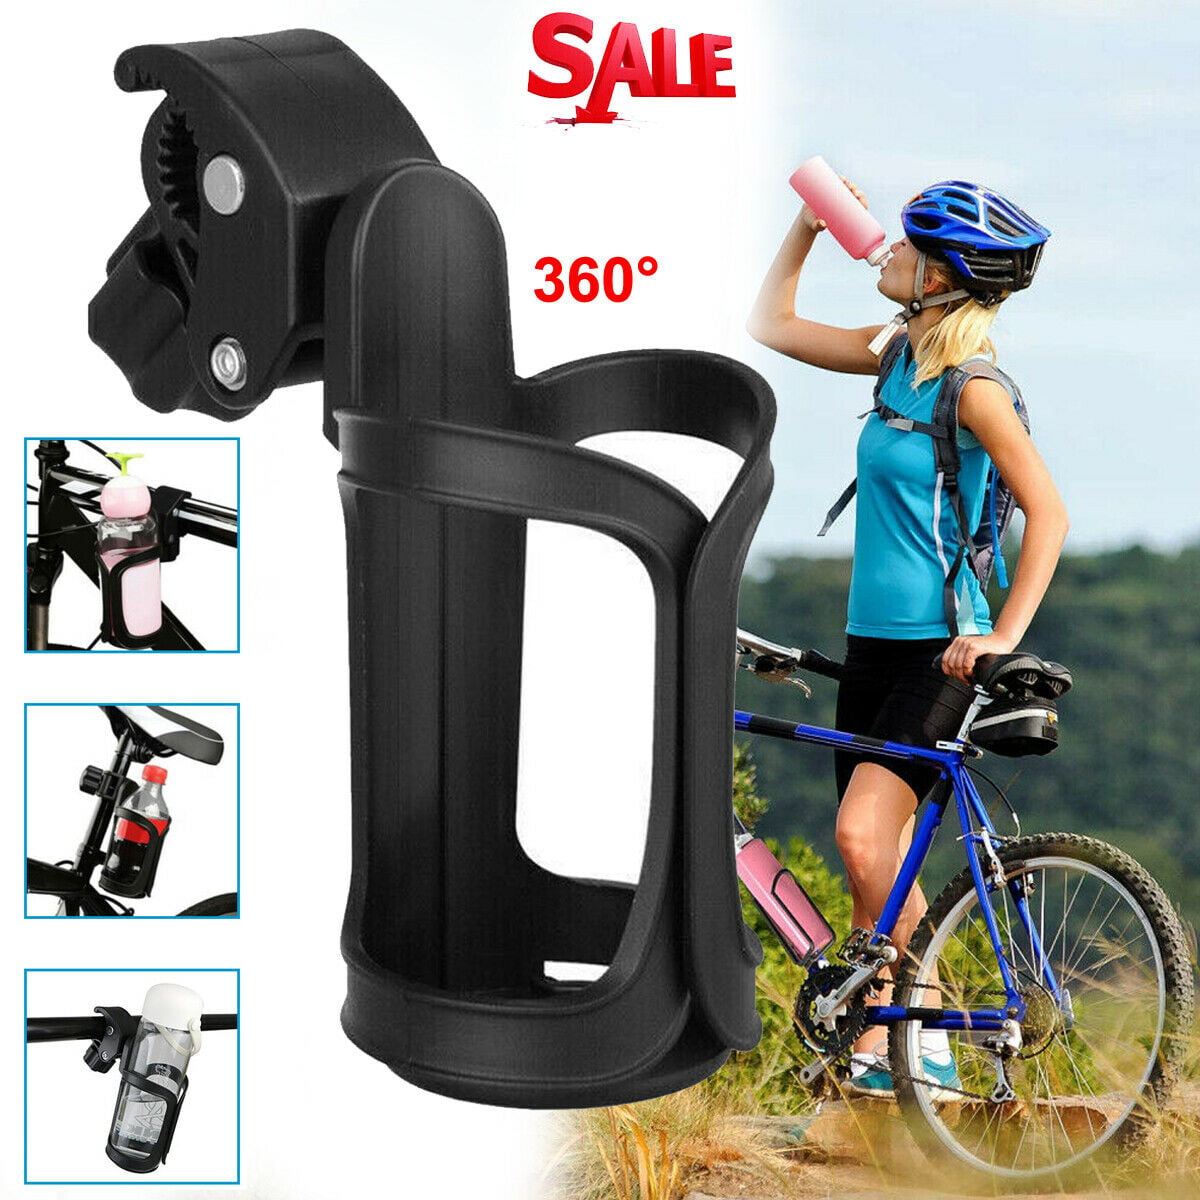 2 Pack Cycling Water Bottle Holder Mount Handlebar Bicycle Bottle Cage Drink Cup 